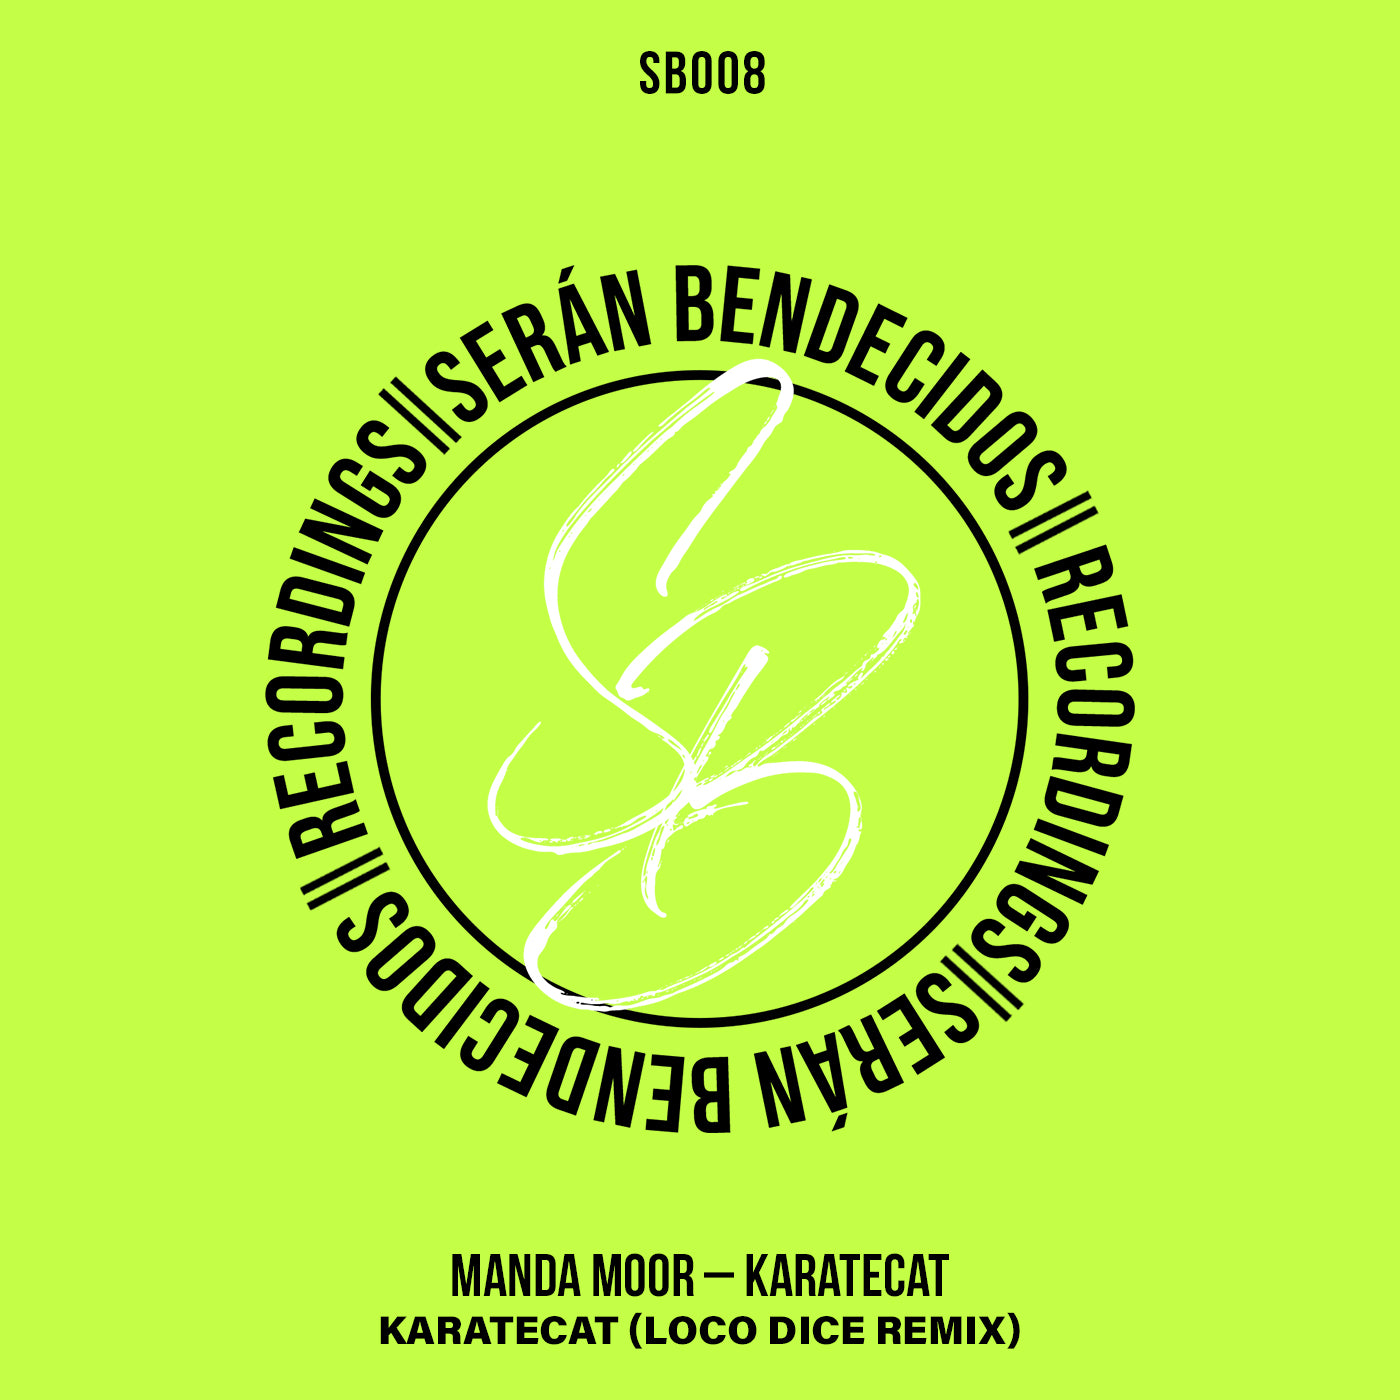 SB008 - Manda Moor new single ‘KarateCat’ on SB Recordings, backed by a remix from label boss Loco Dice